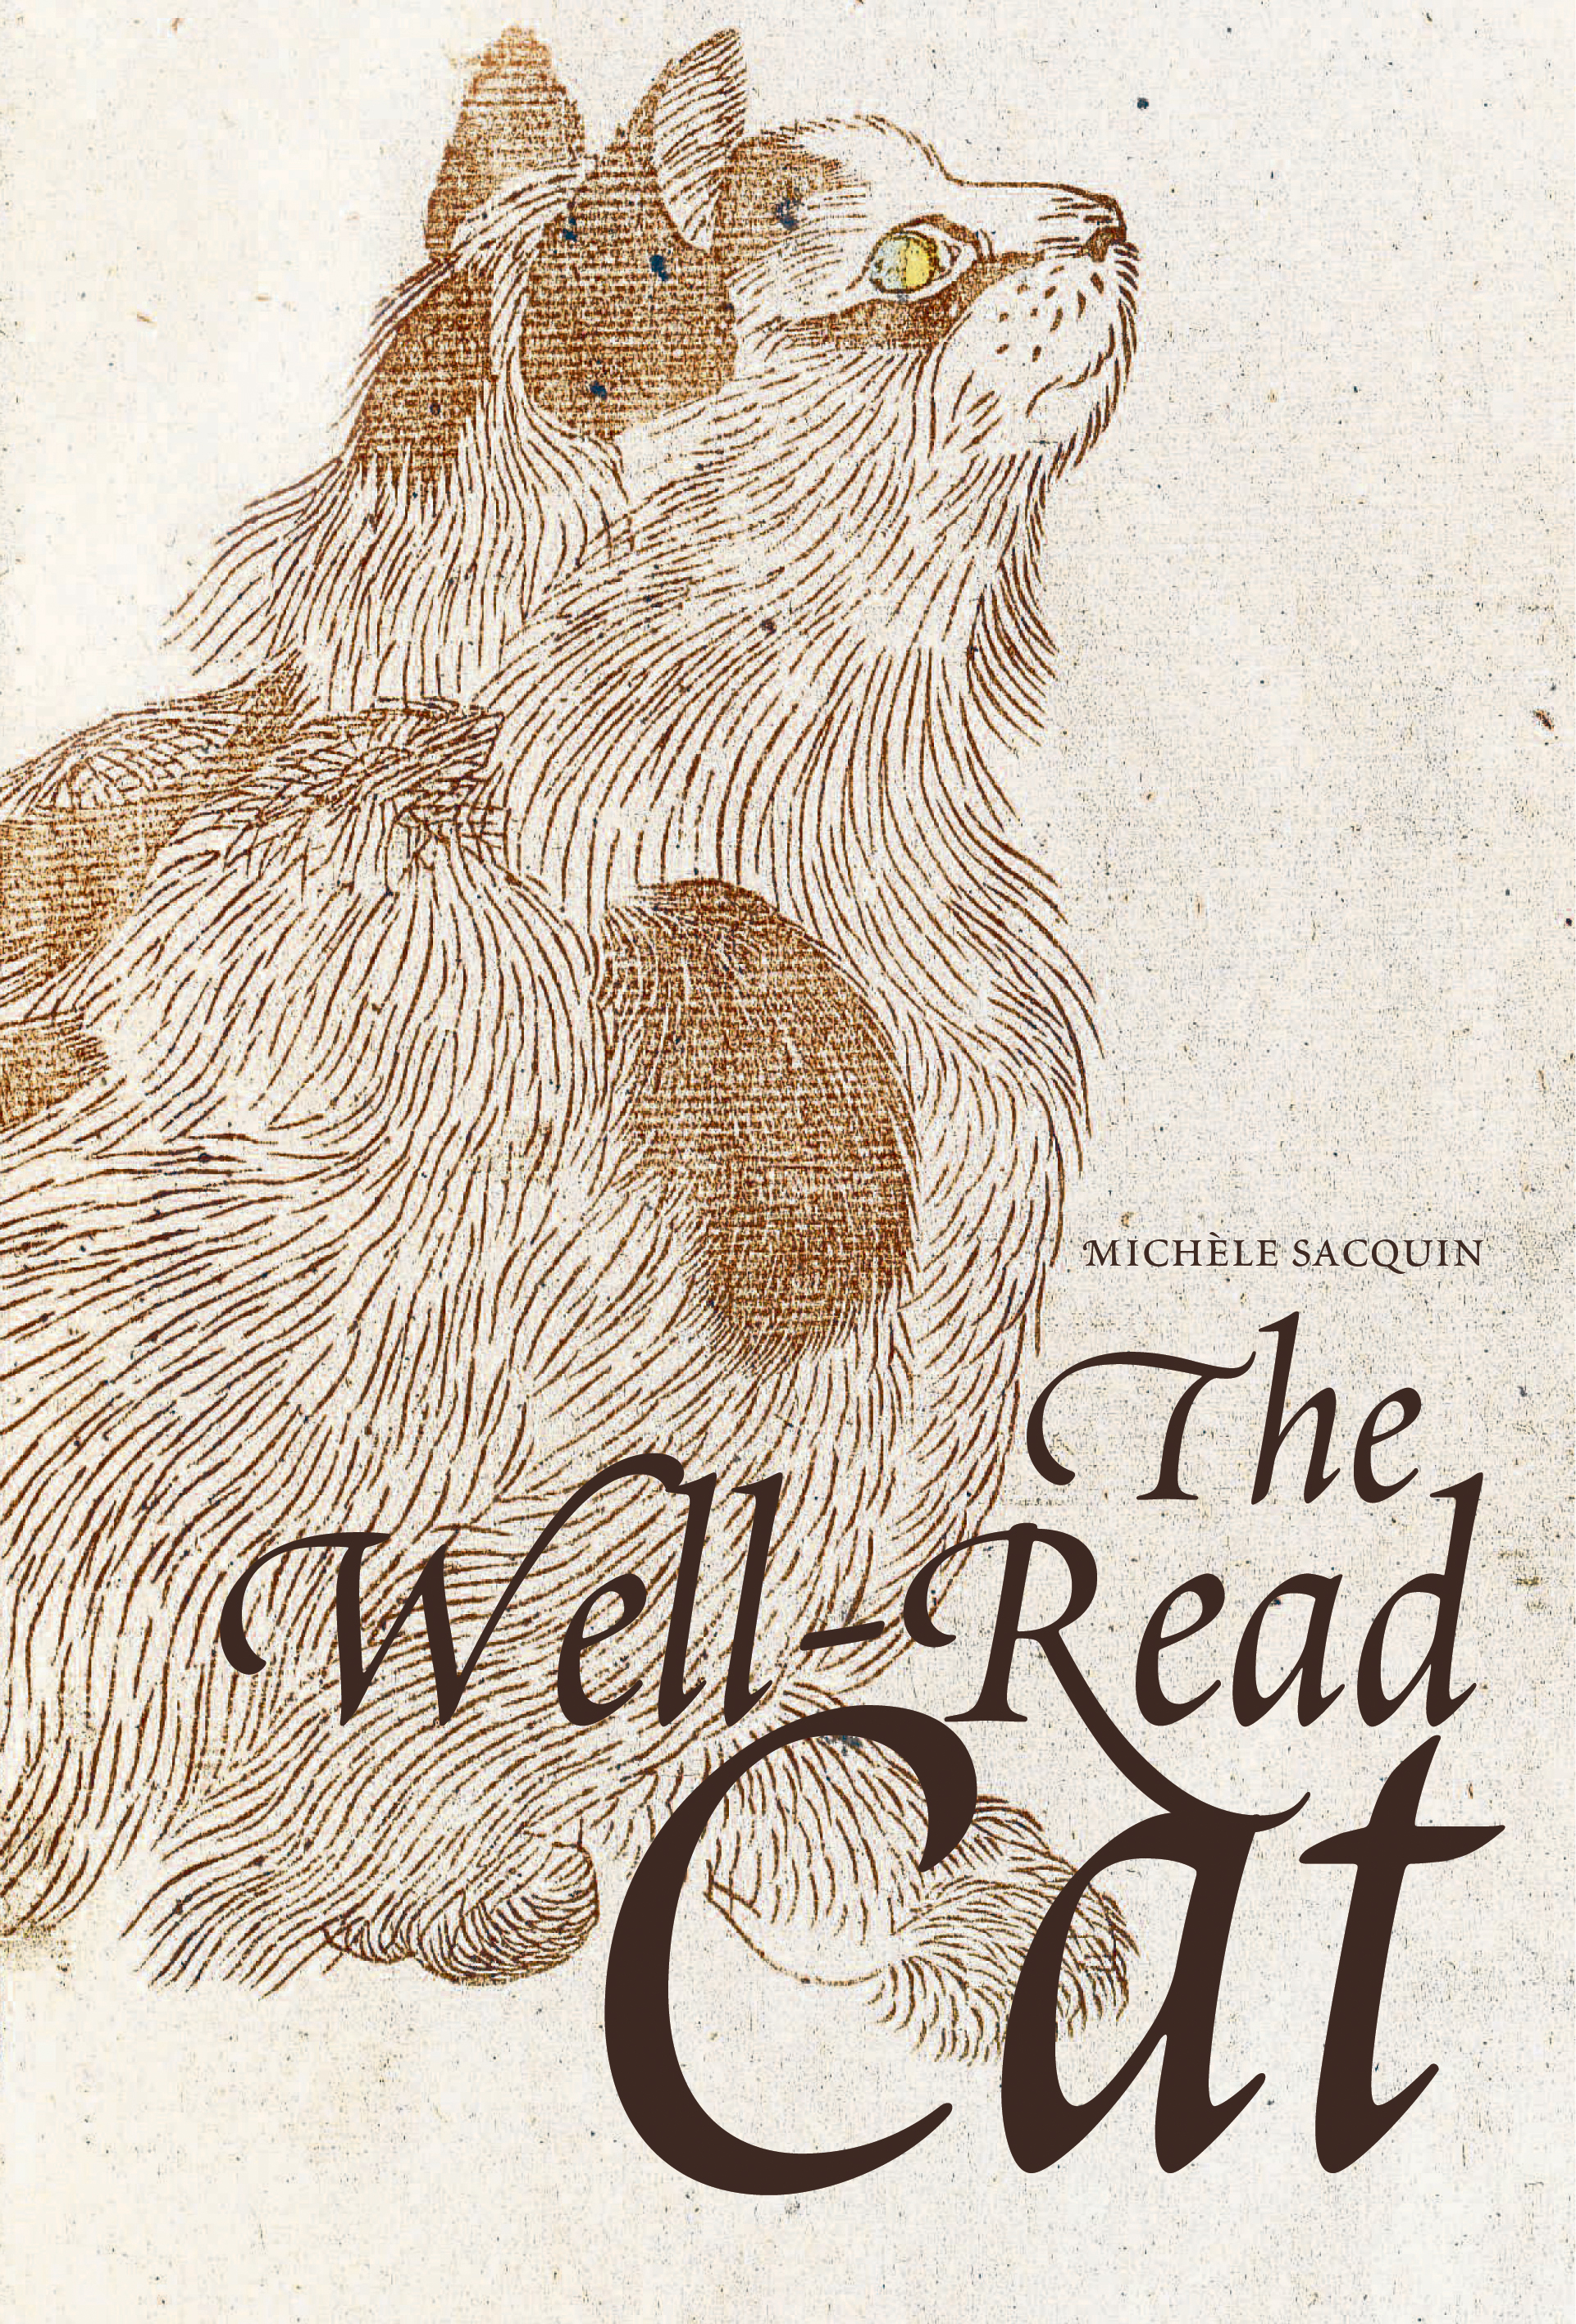 The Well-Read Cat